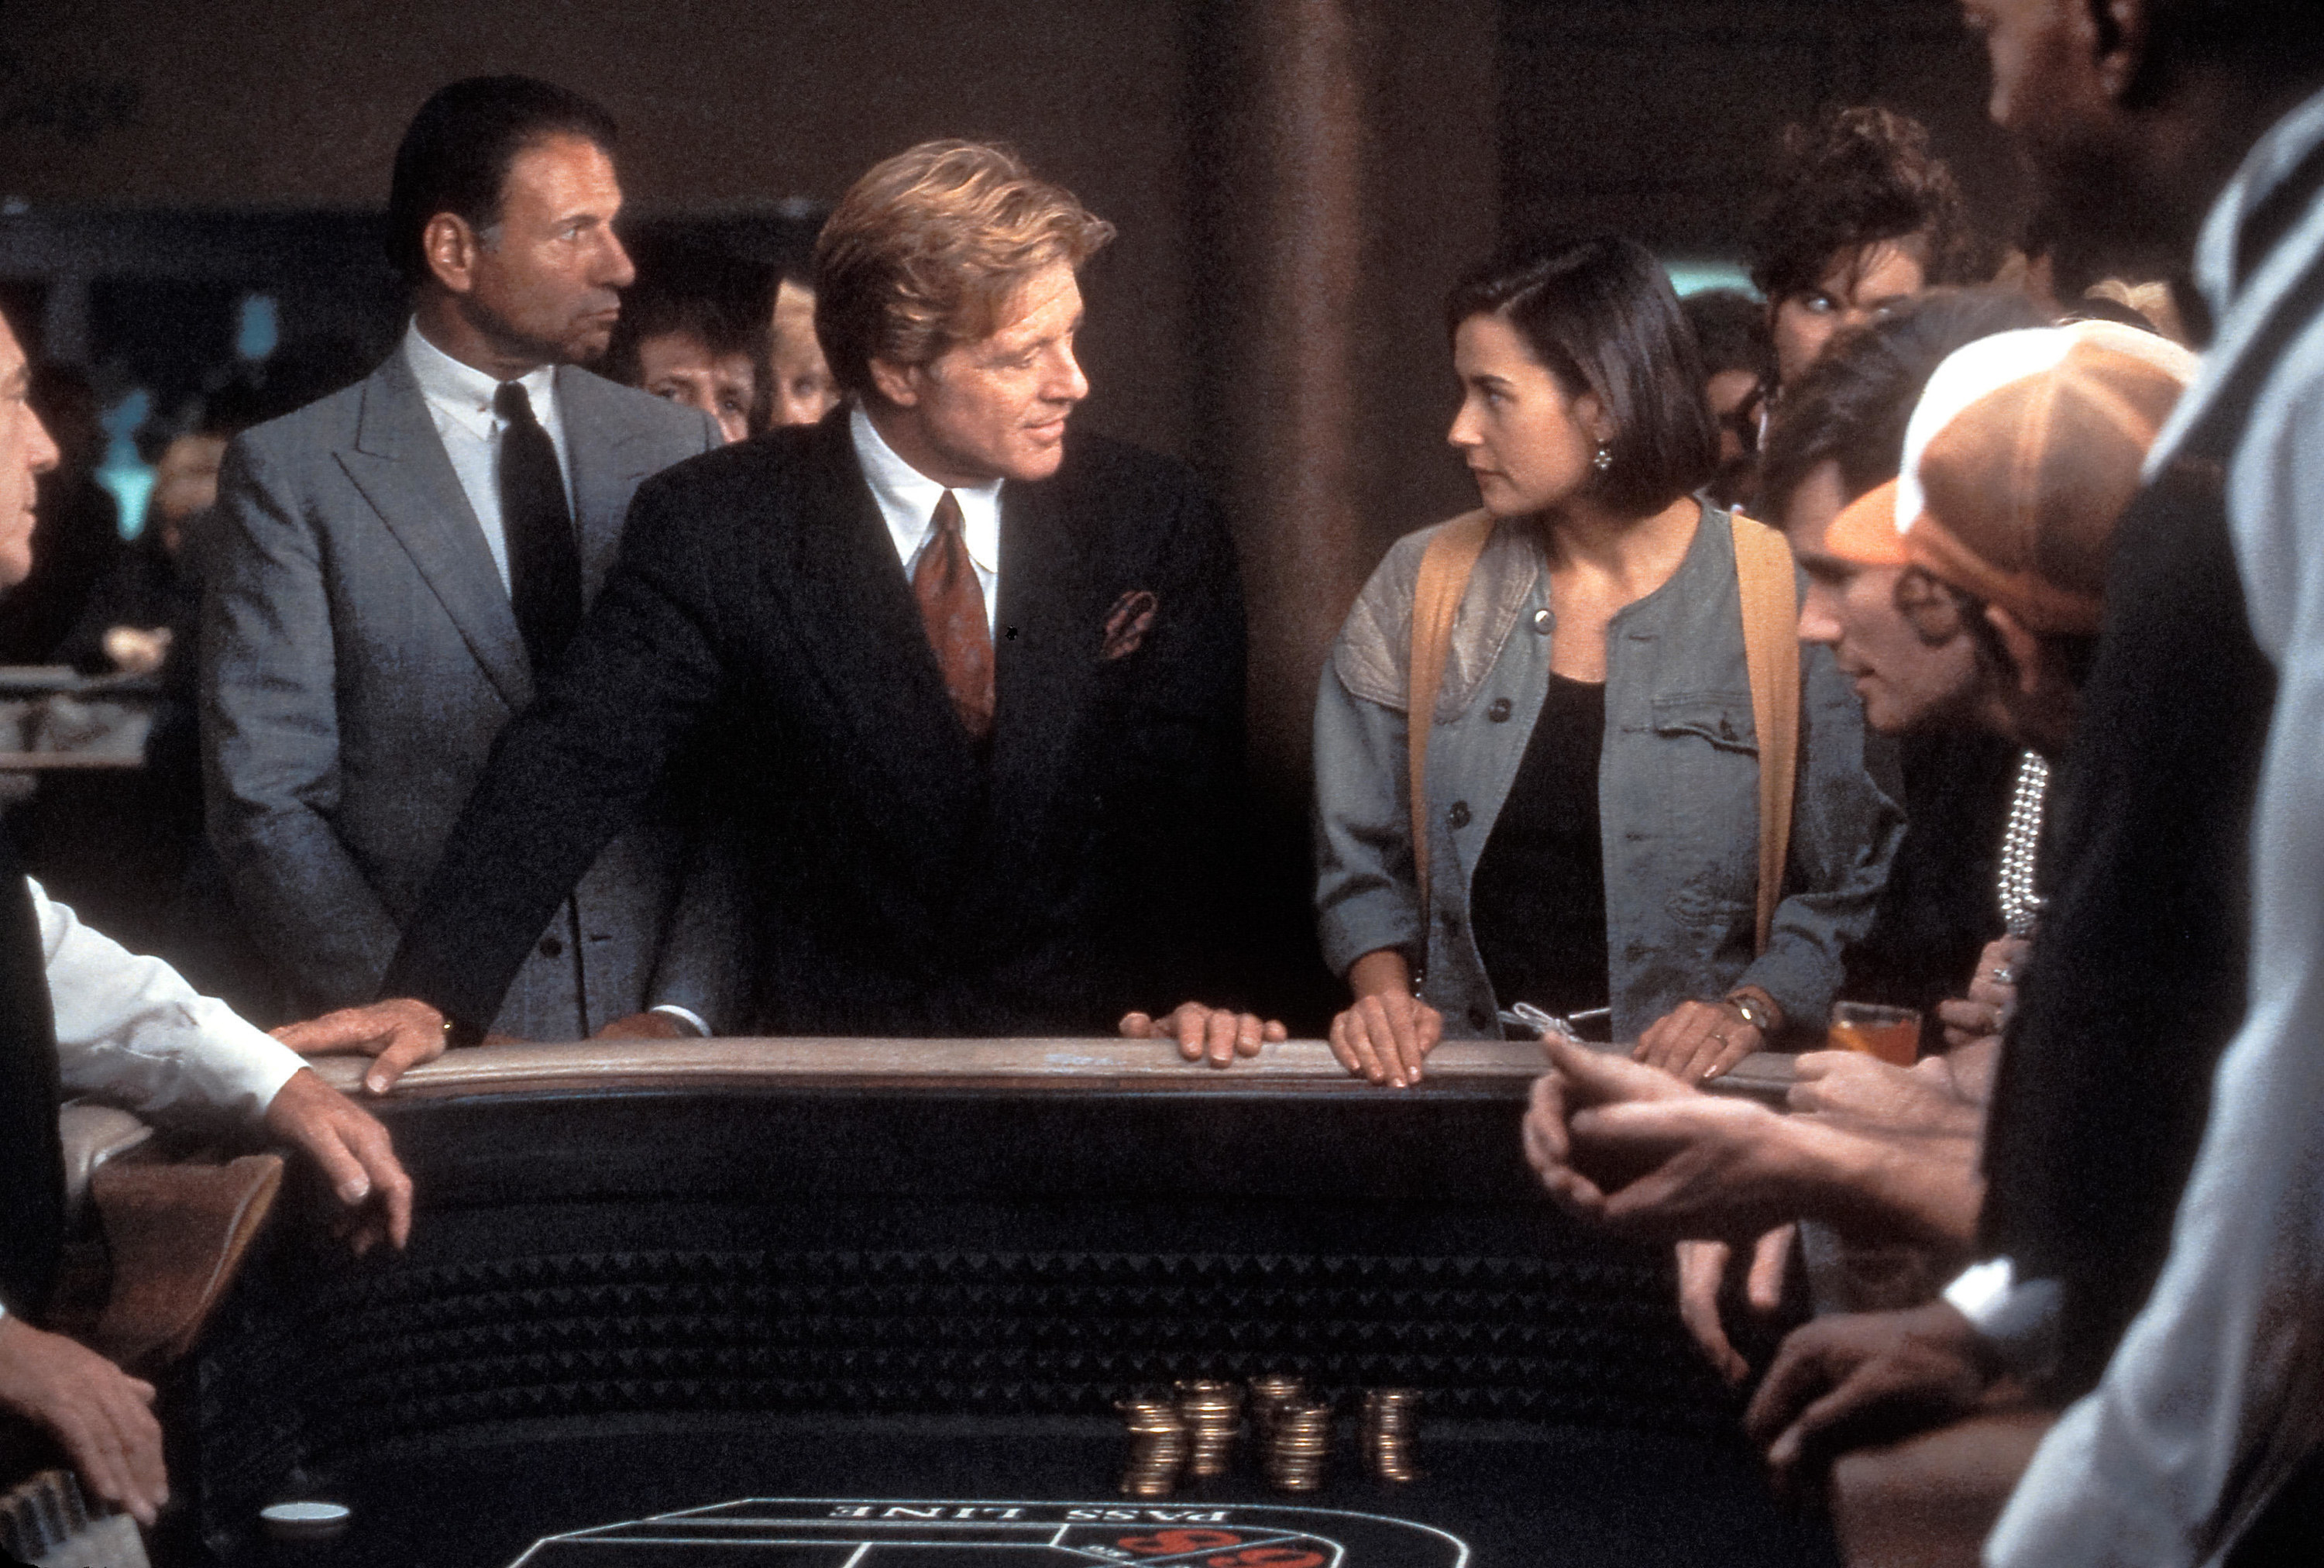 demi moore and robert redford at a craps table in indecent proposal